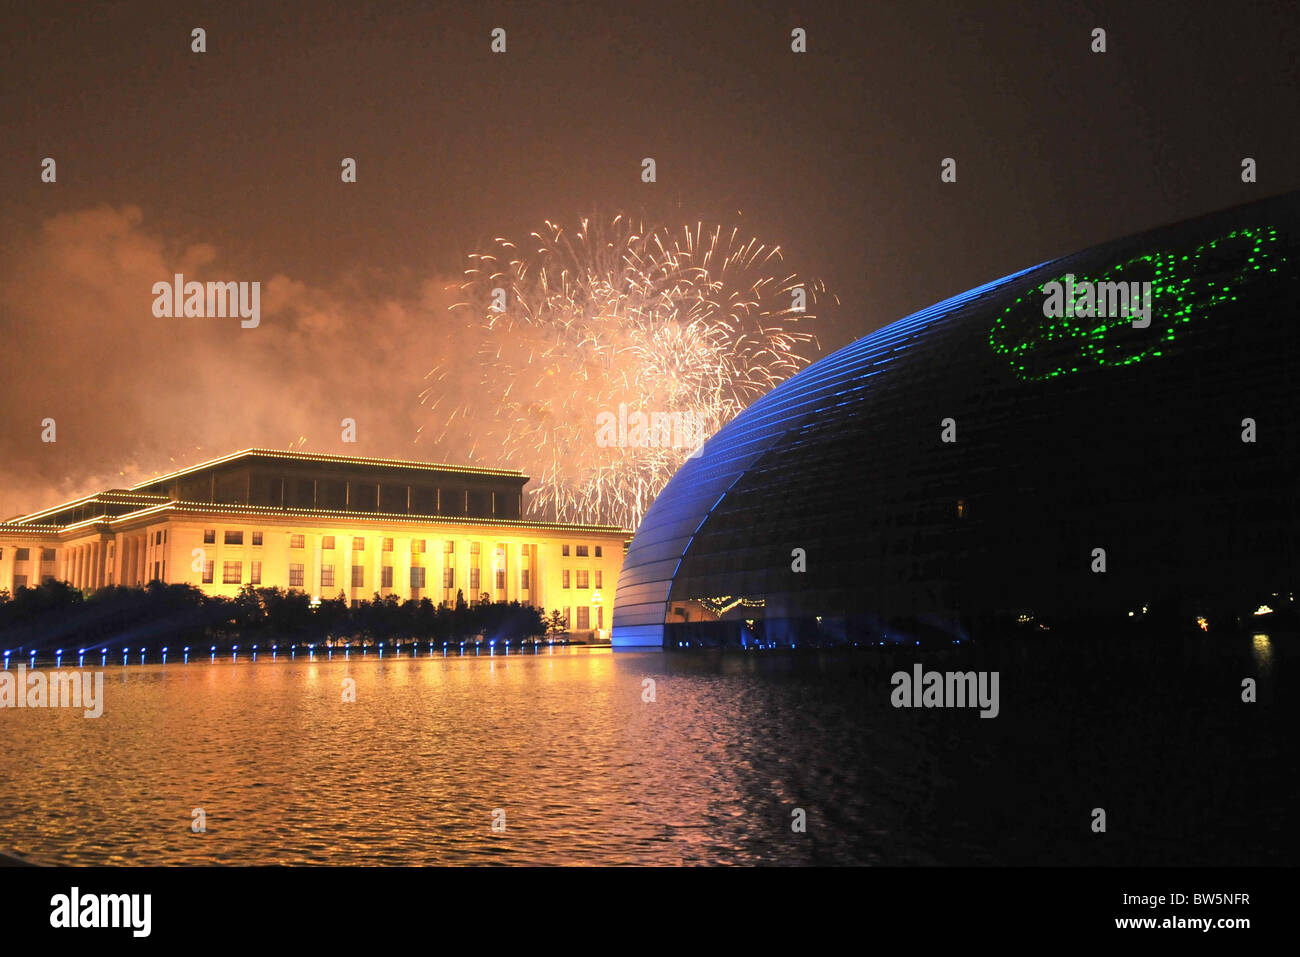 Aug 08 - Beijing Summer 2008 Olympic Games Stock Photo